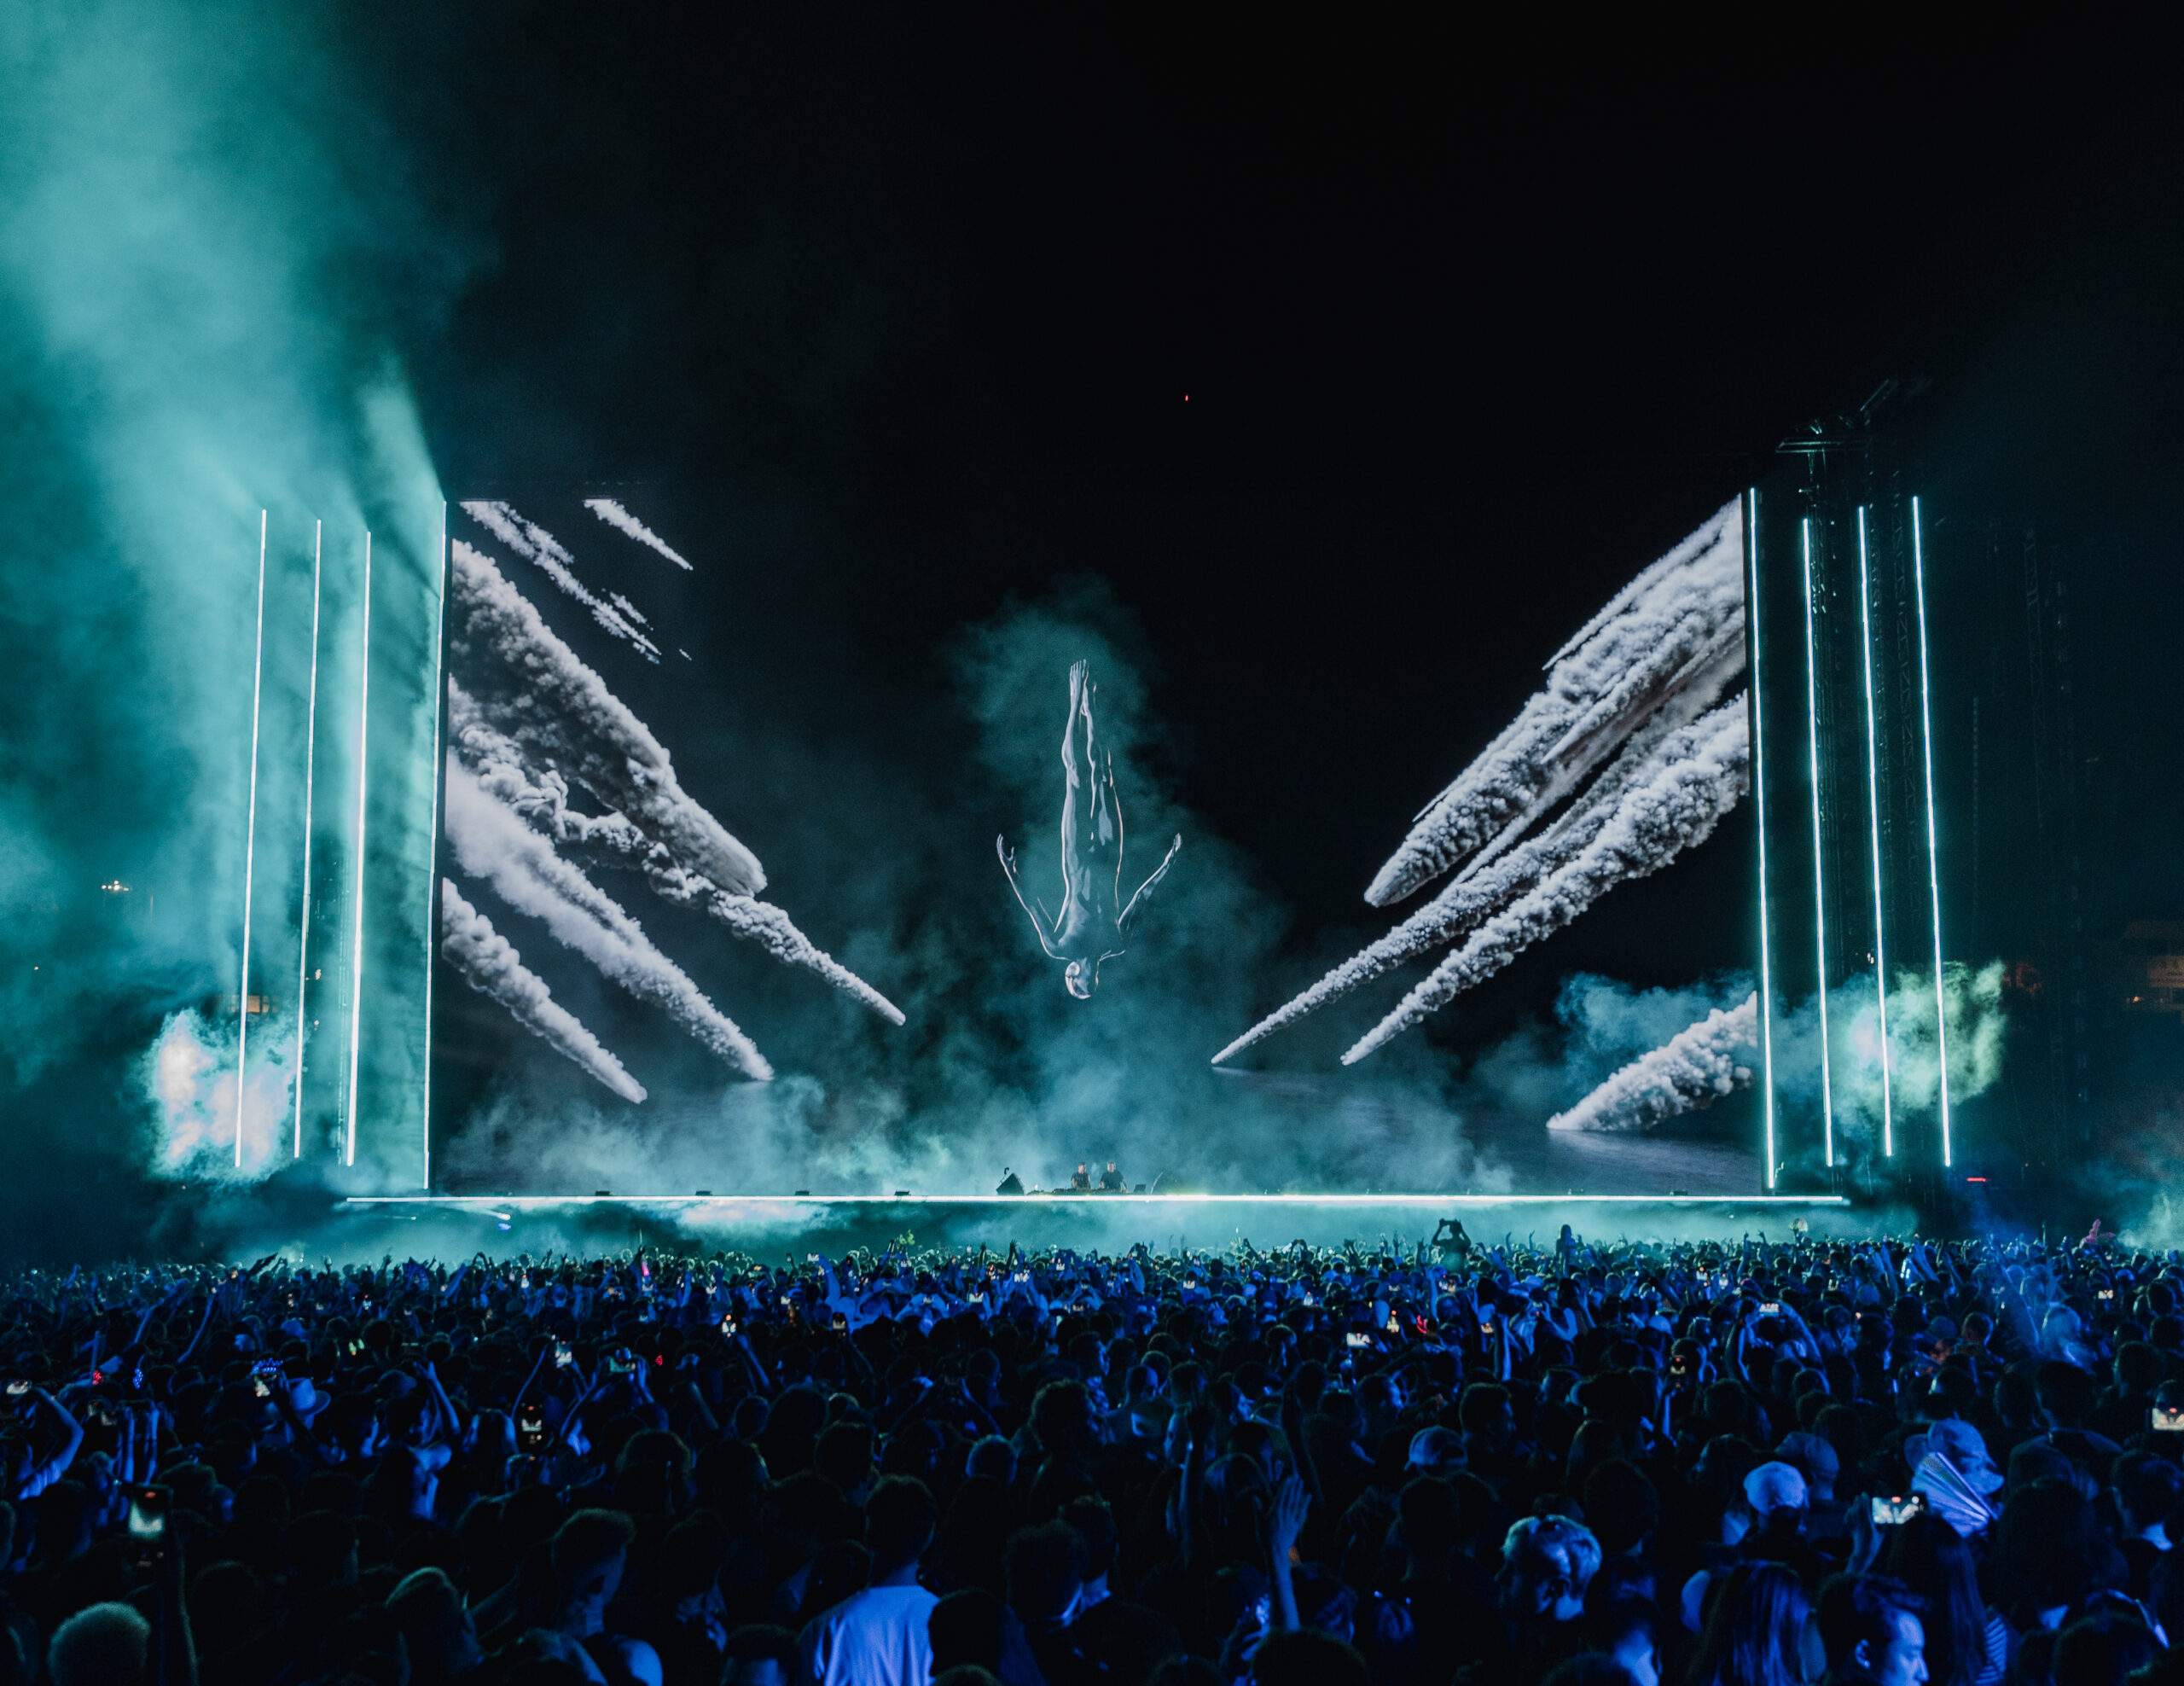 Afterlife Announces Lineup for 2024 Zamna Festival Takeover -  - The  Latest Electronic Dance Music News, Reviews & Artists